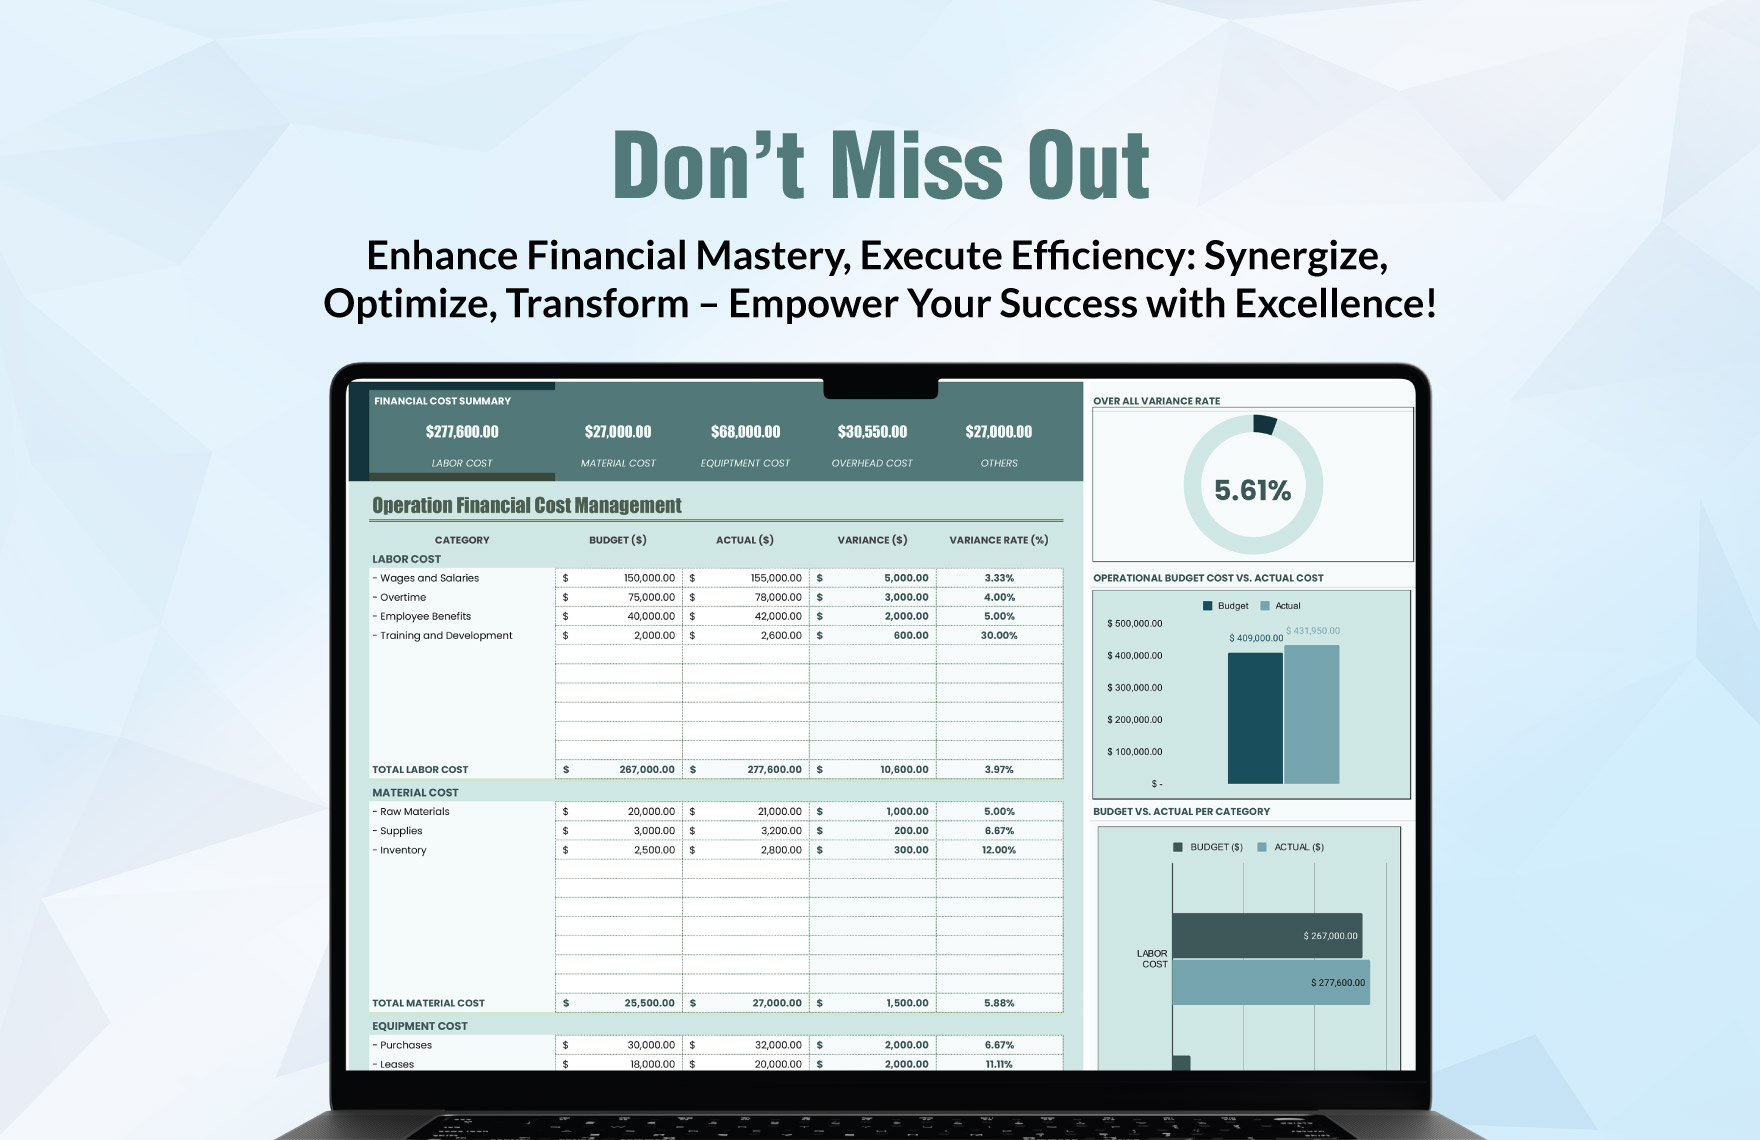 Operational Financial Cost Management Template